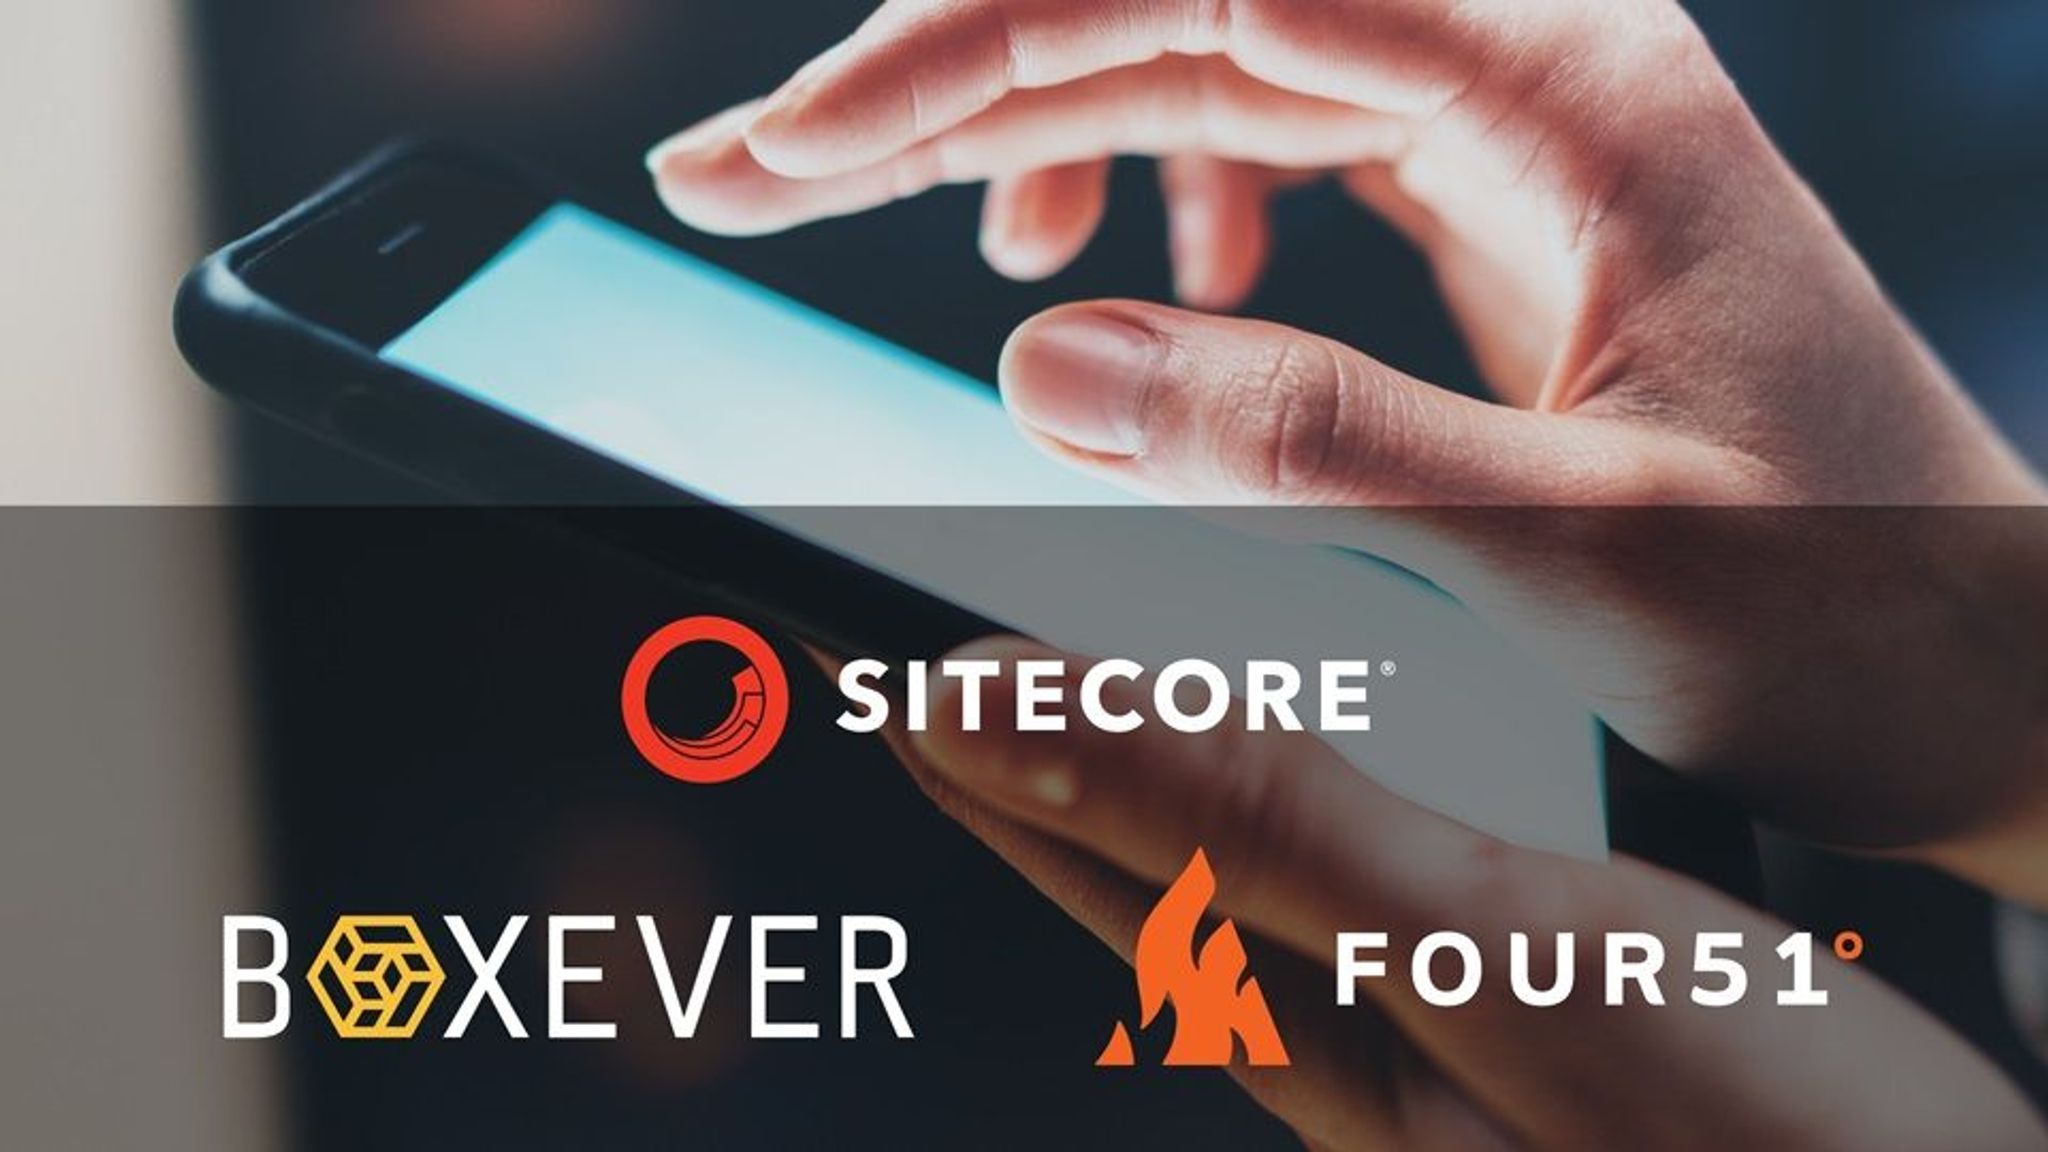 Image of hand tapping on a mobile phone with Sitecore, Boxever, and Four51 logos on the front